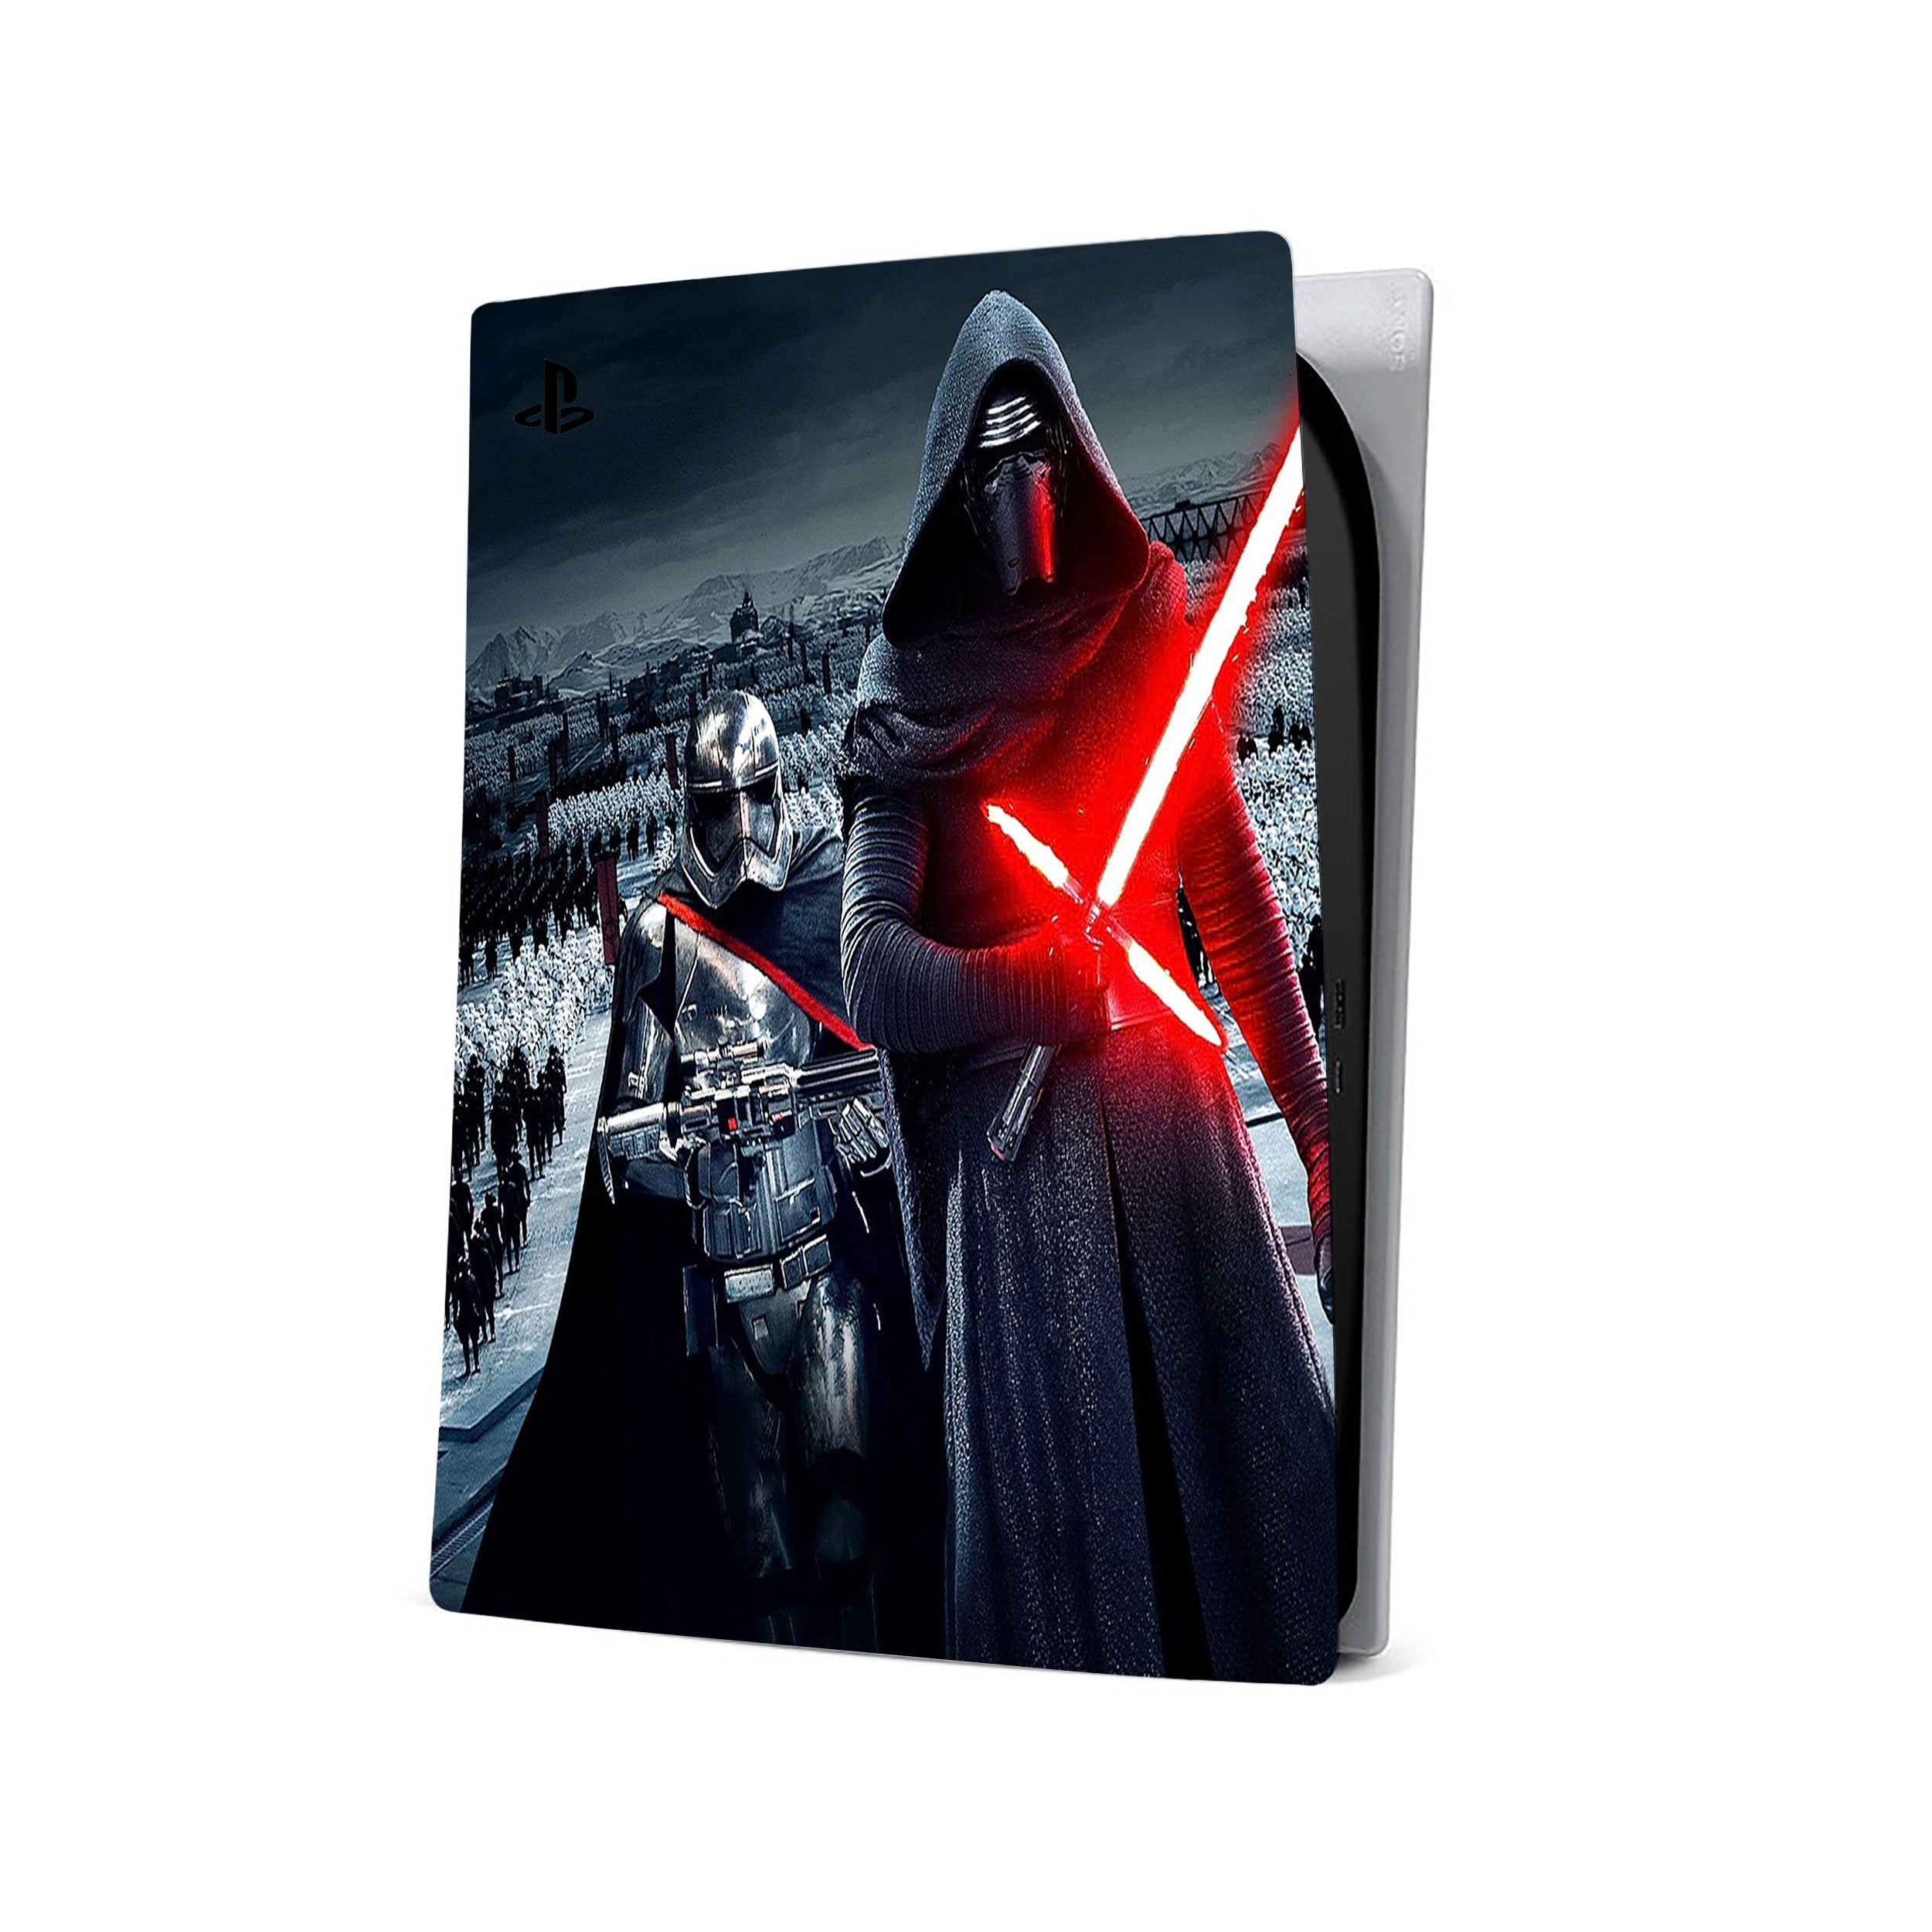 A video game skin featuring a Star Wars Kylo Ren design for the PS5.